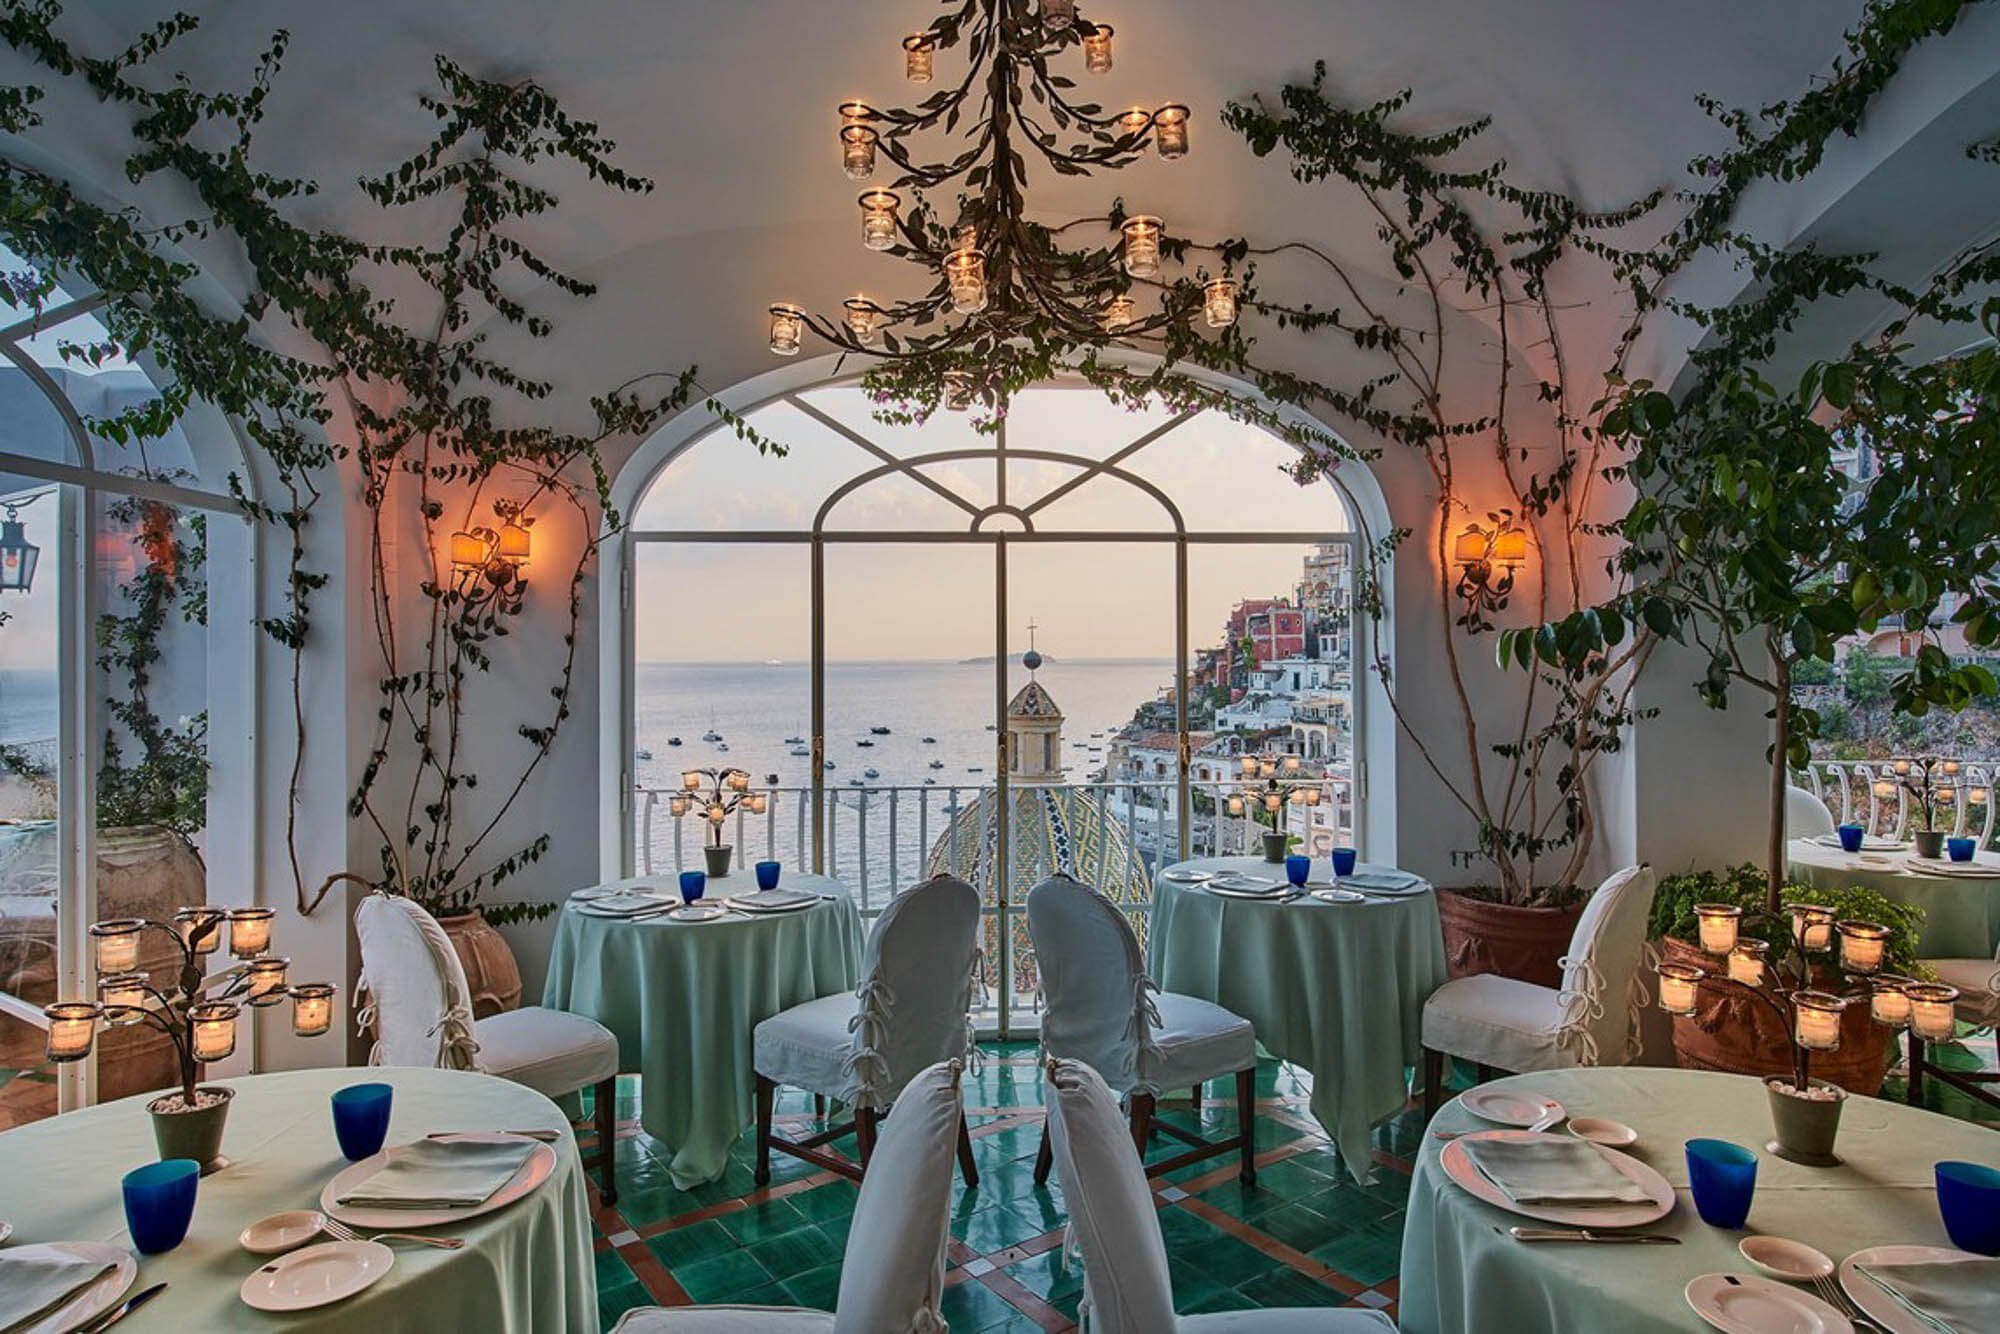 La Sponda at Le Sirenuse is without a doubt one of the most beautiful restaurants in Positano Italy